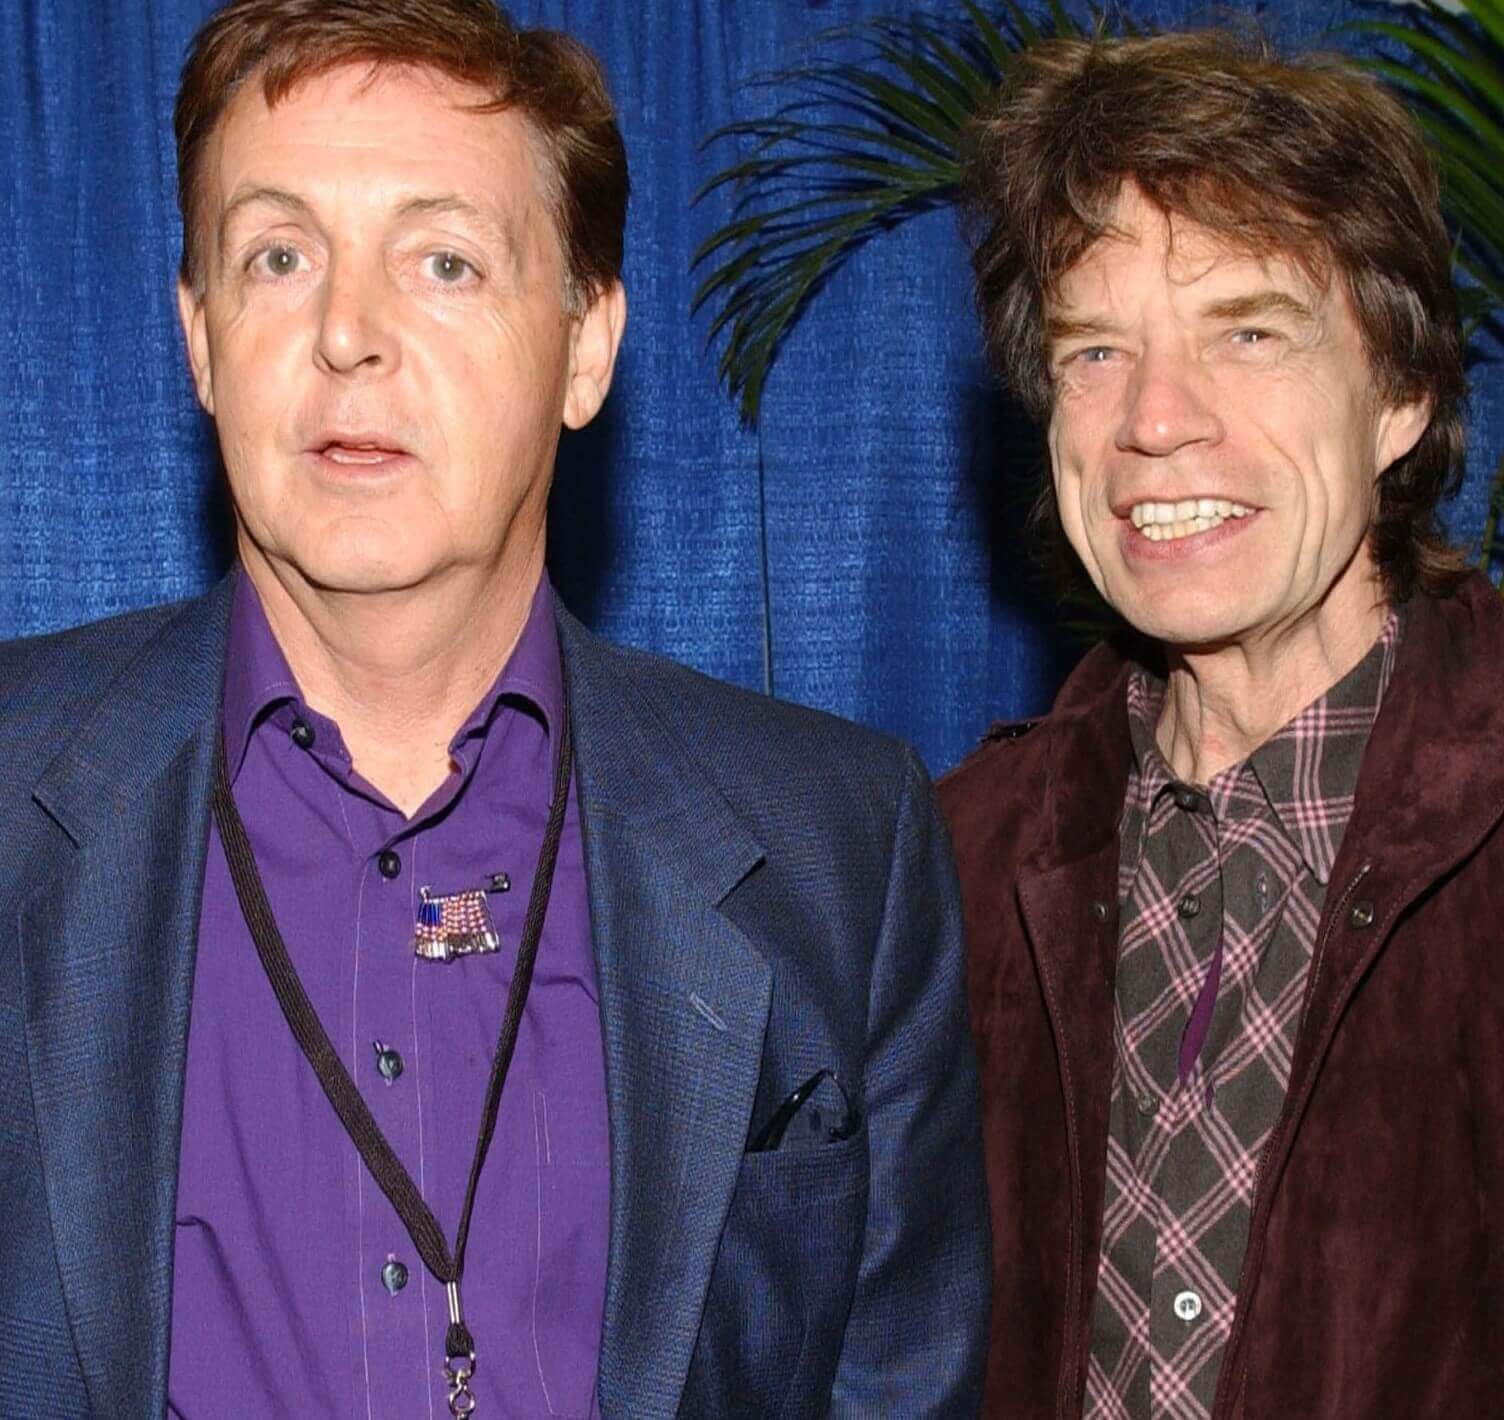 The Beatles' Paul McCartney with The Rolling Stones' Mick Jagger